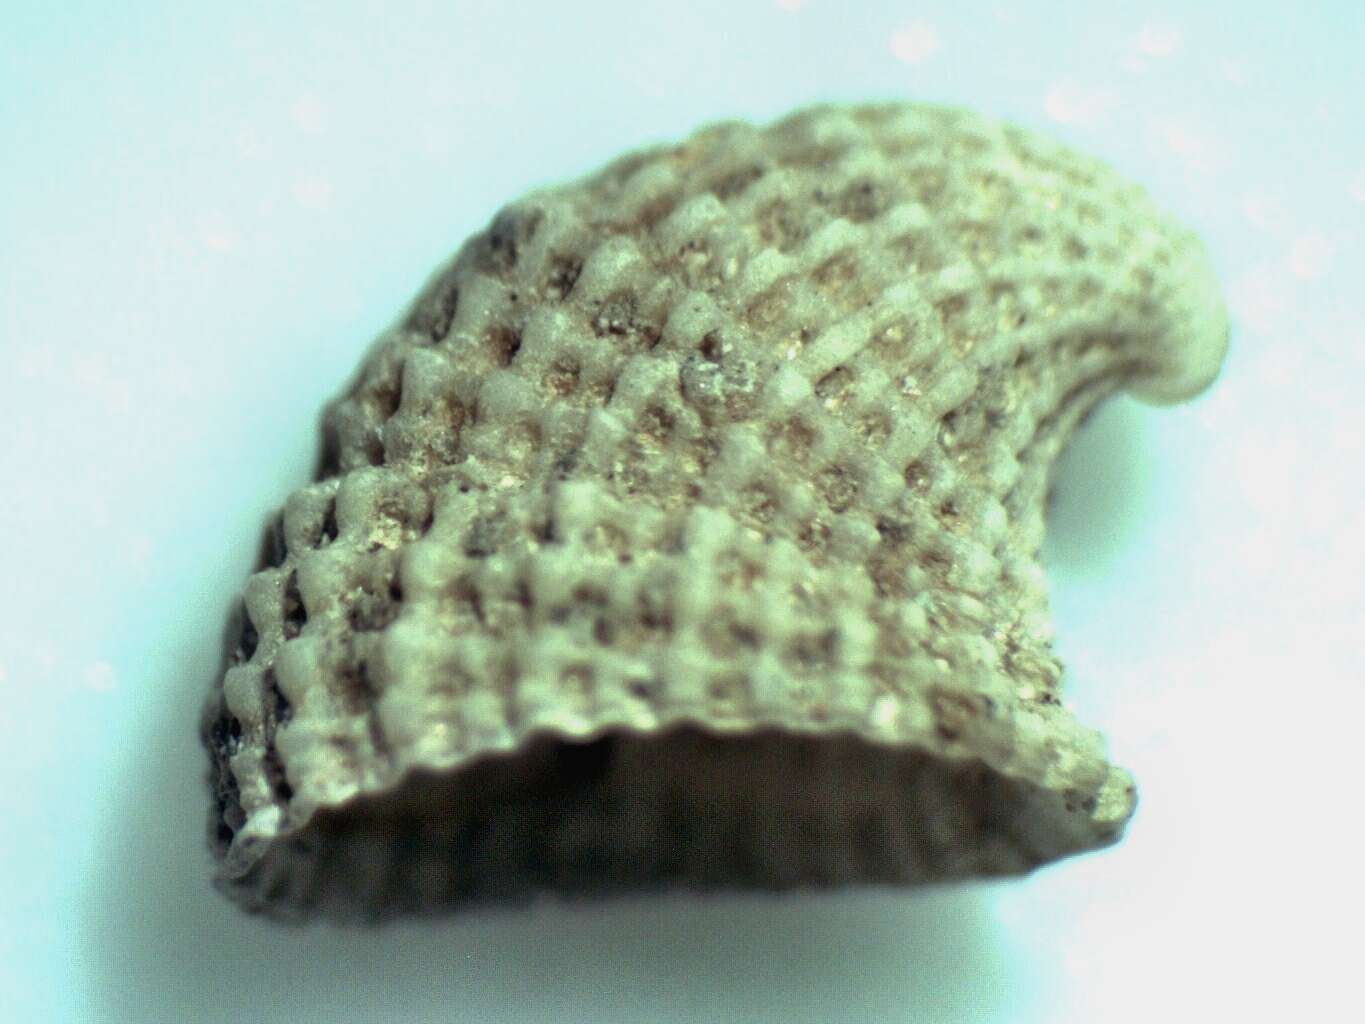 Image of Channel Island Slit Limpet